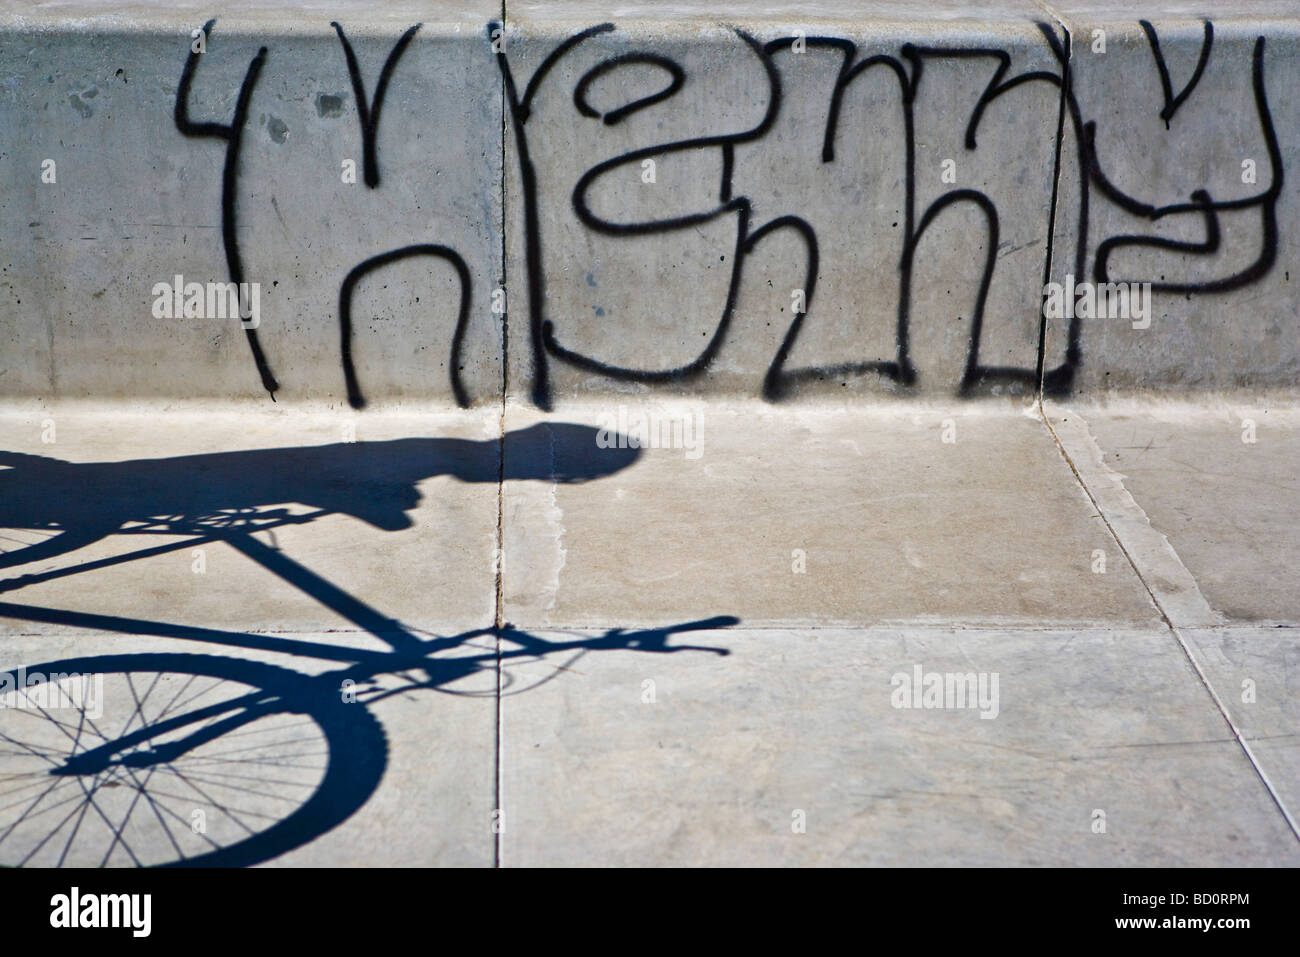 Shadow on sidewalk of person with bicycle, graffiti on wall Stock Photo